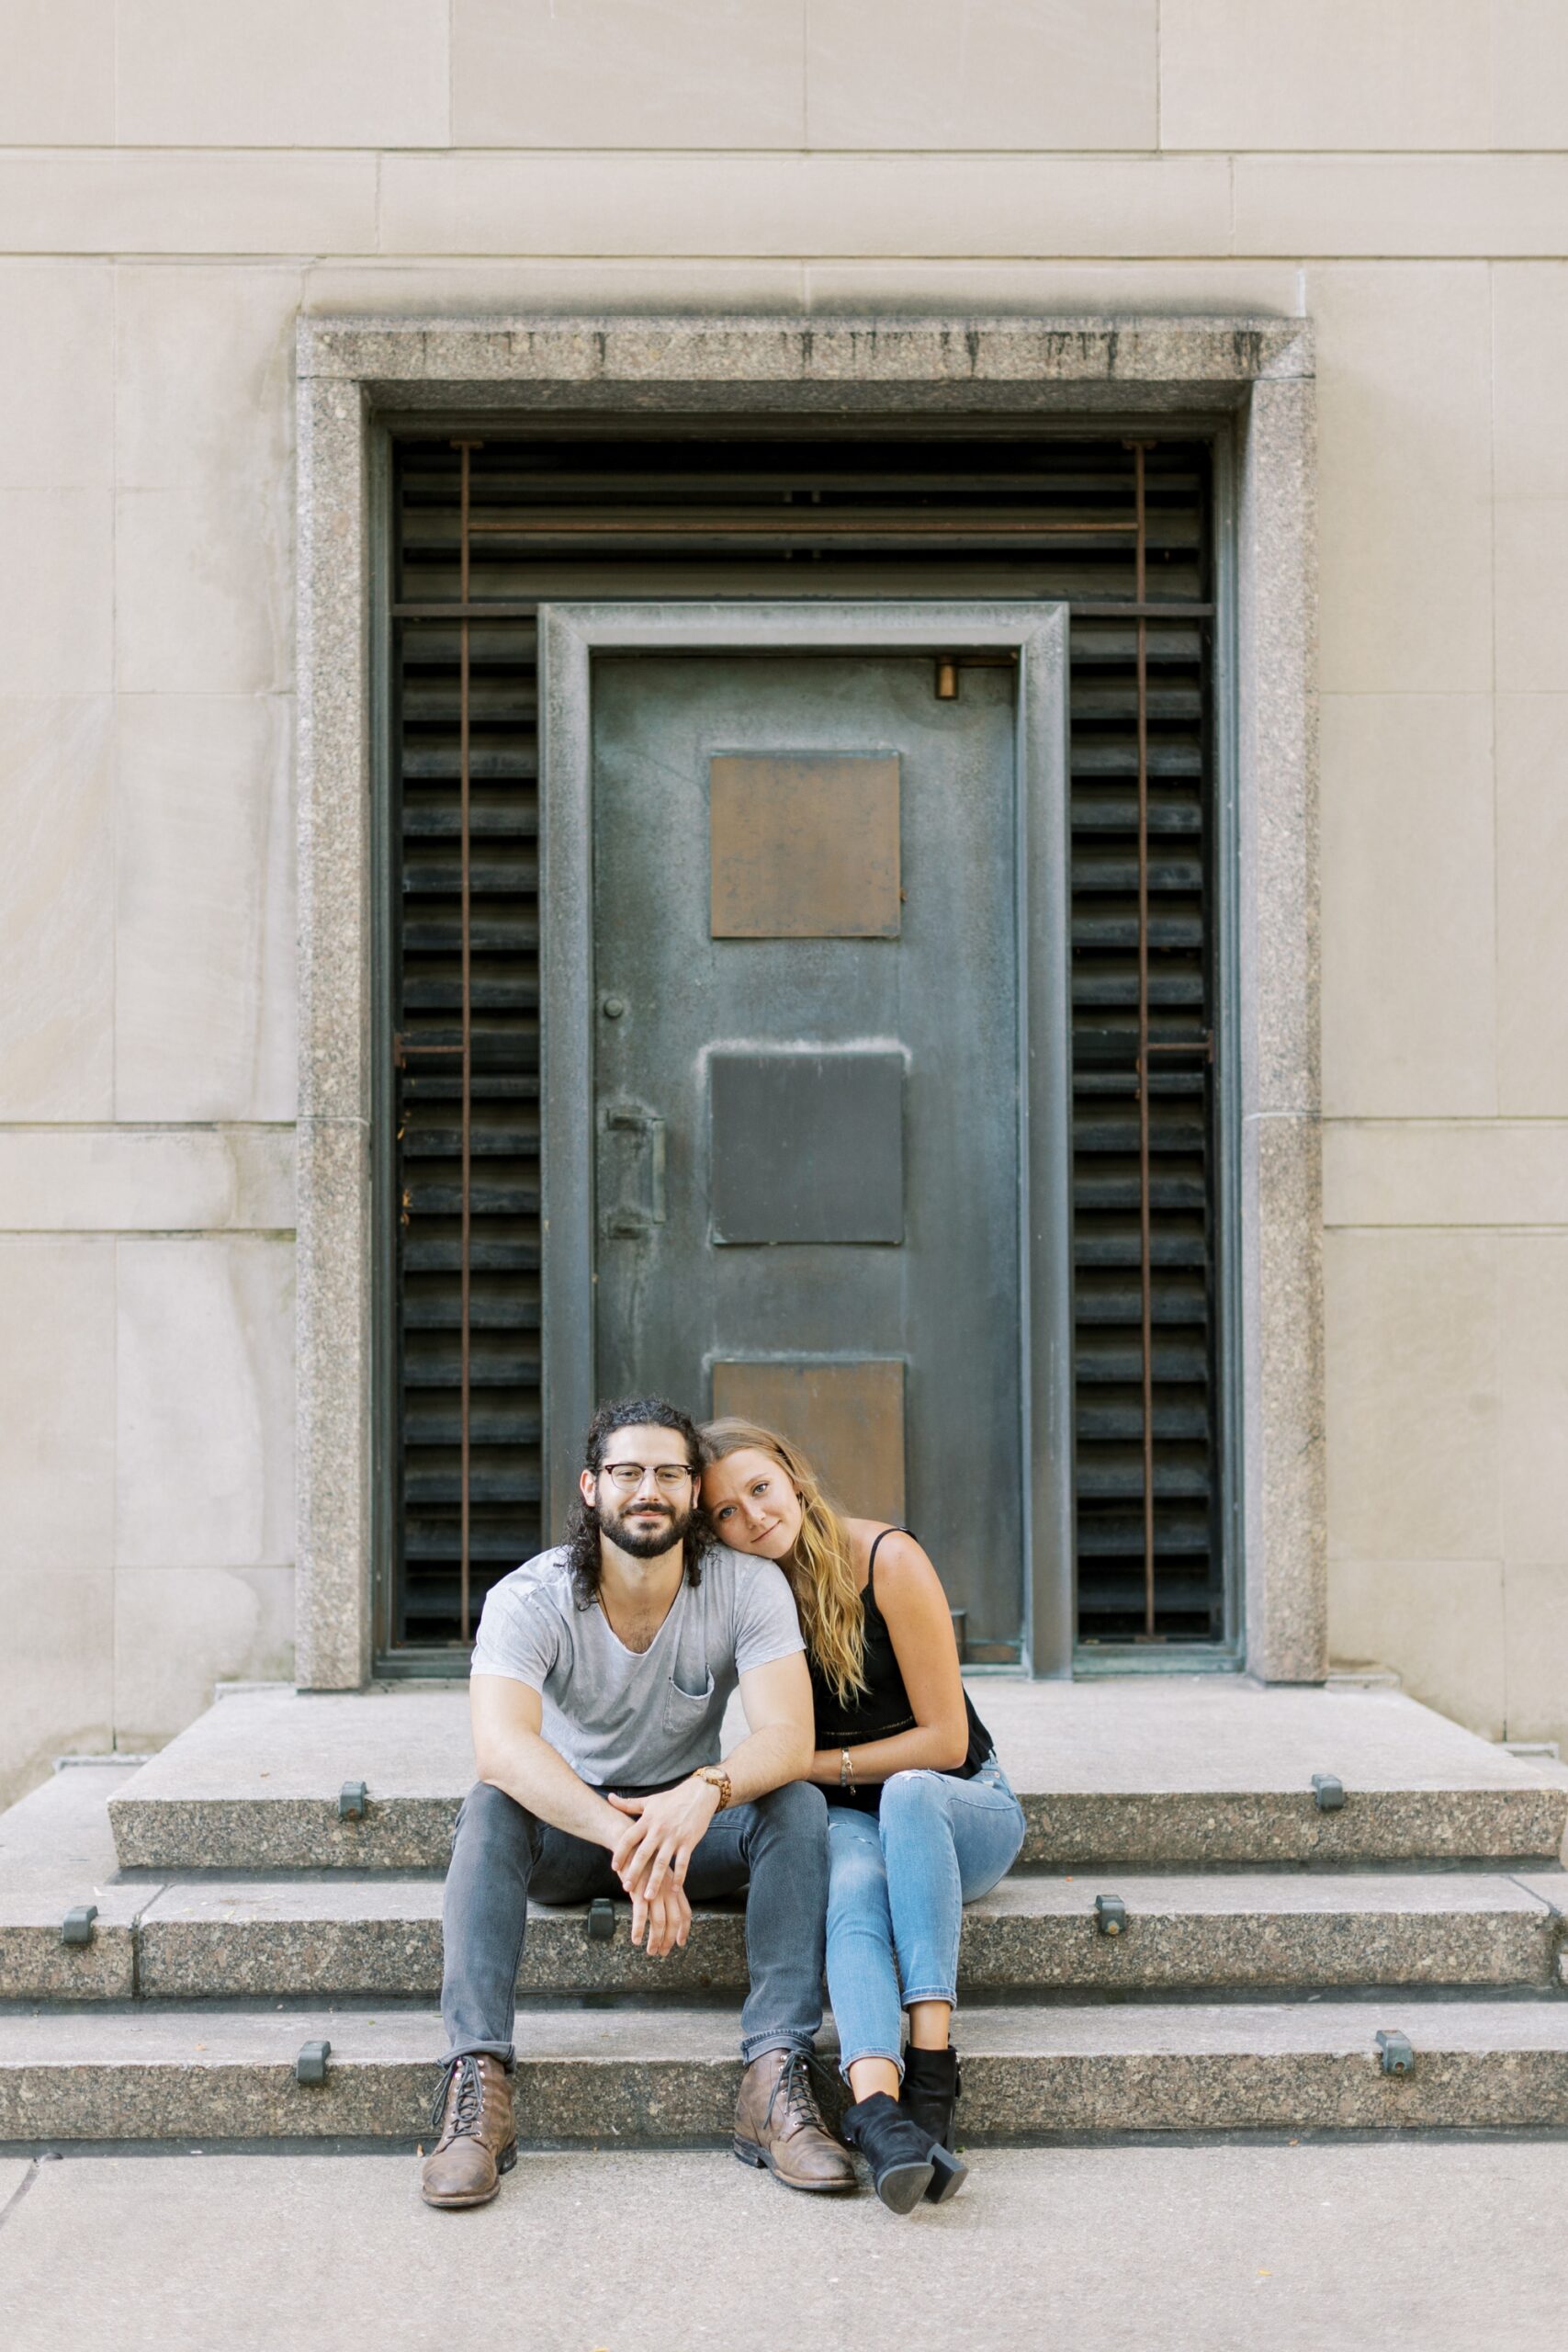 Man and woman smile at the camera during summer city engagement photoshoot